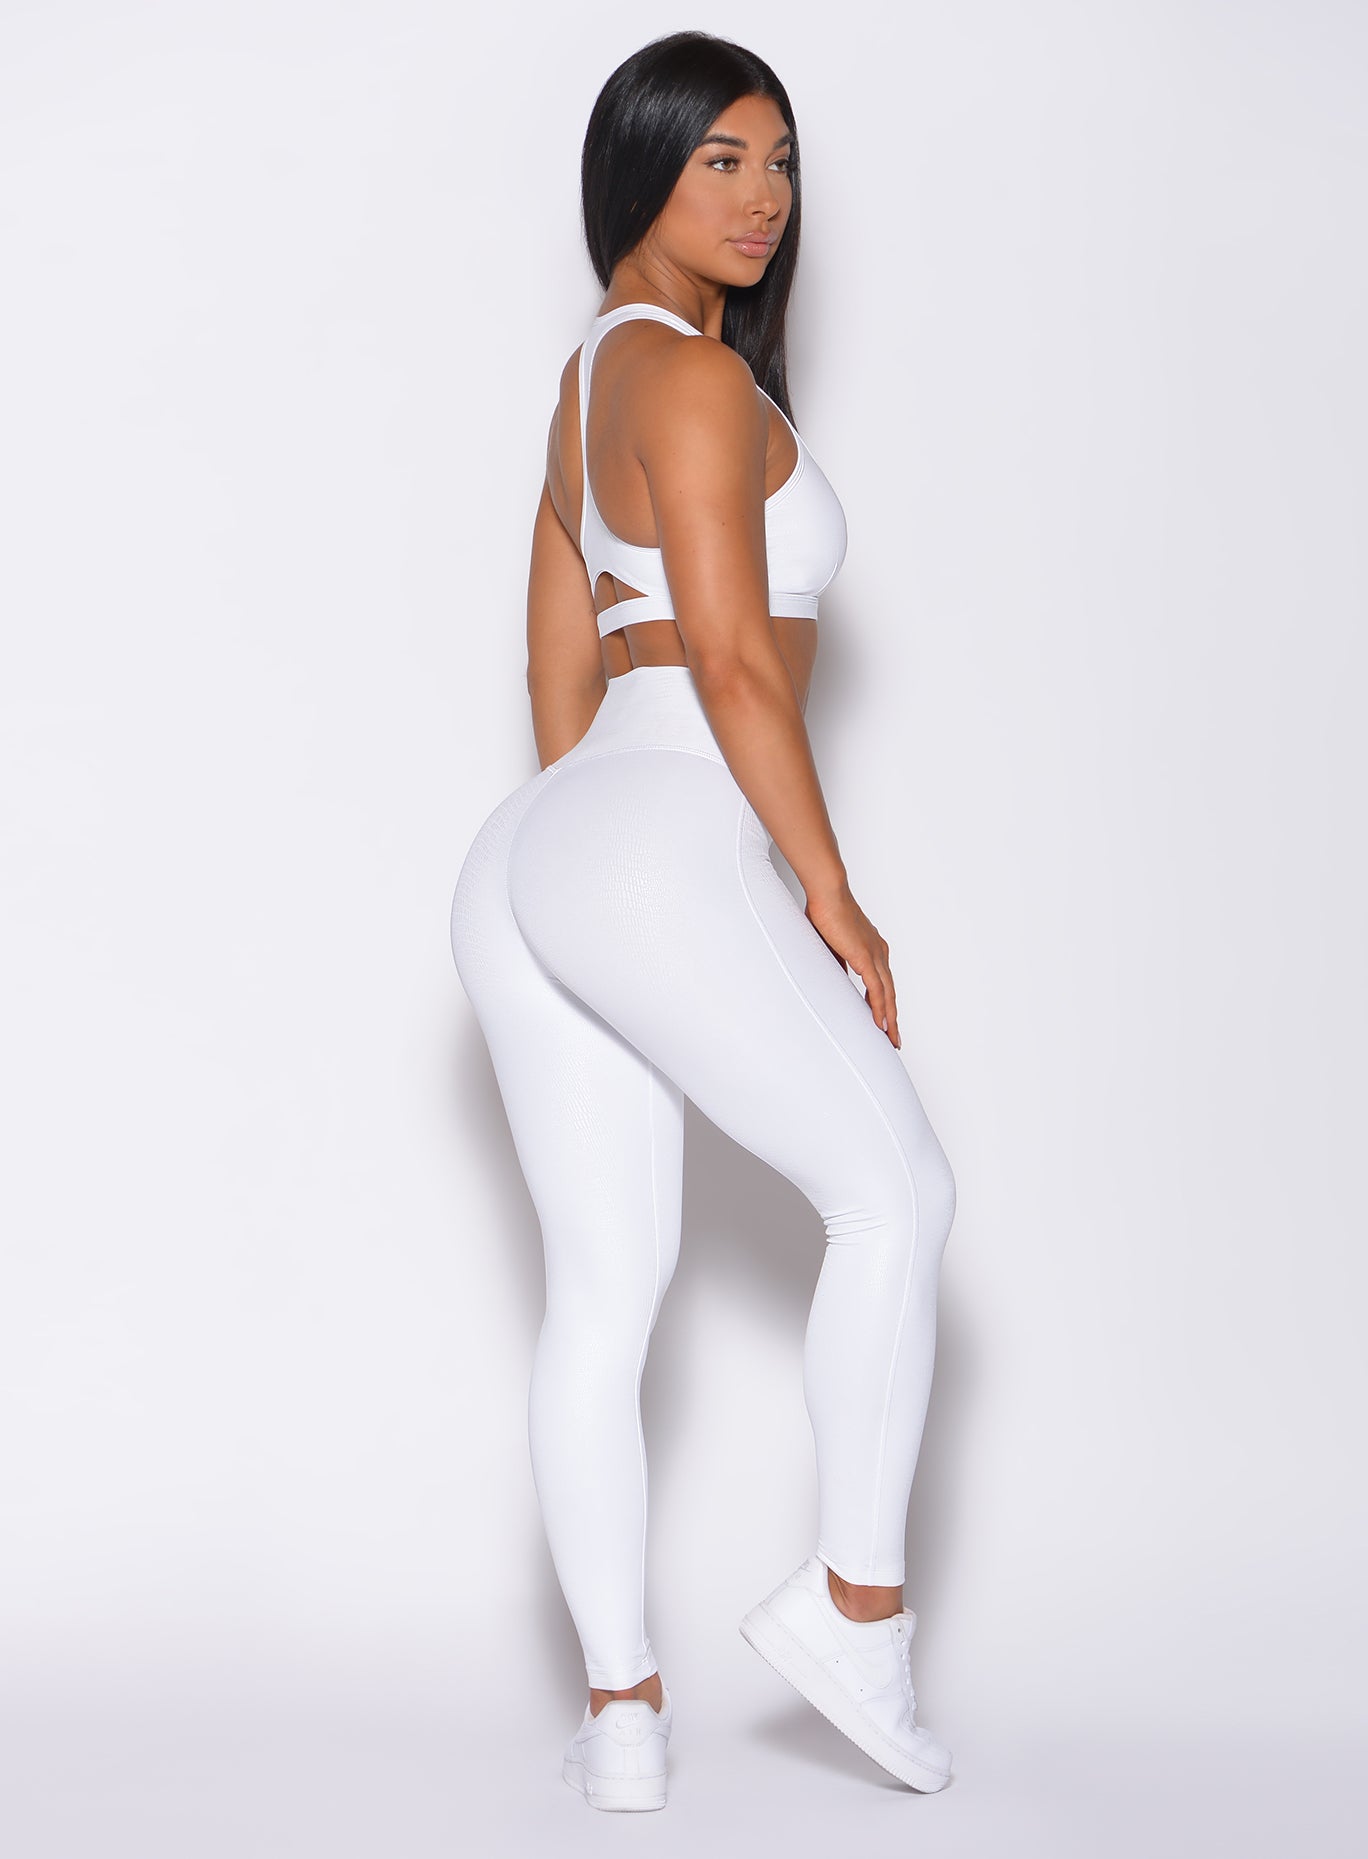 Right side profile view of a model wearing our shine leggings in white python color and a matching bra